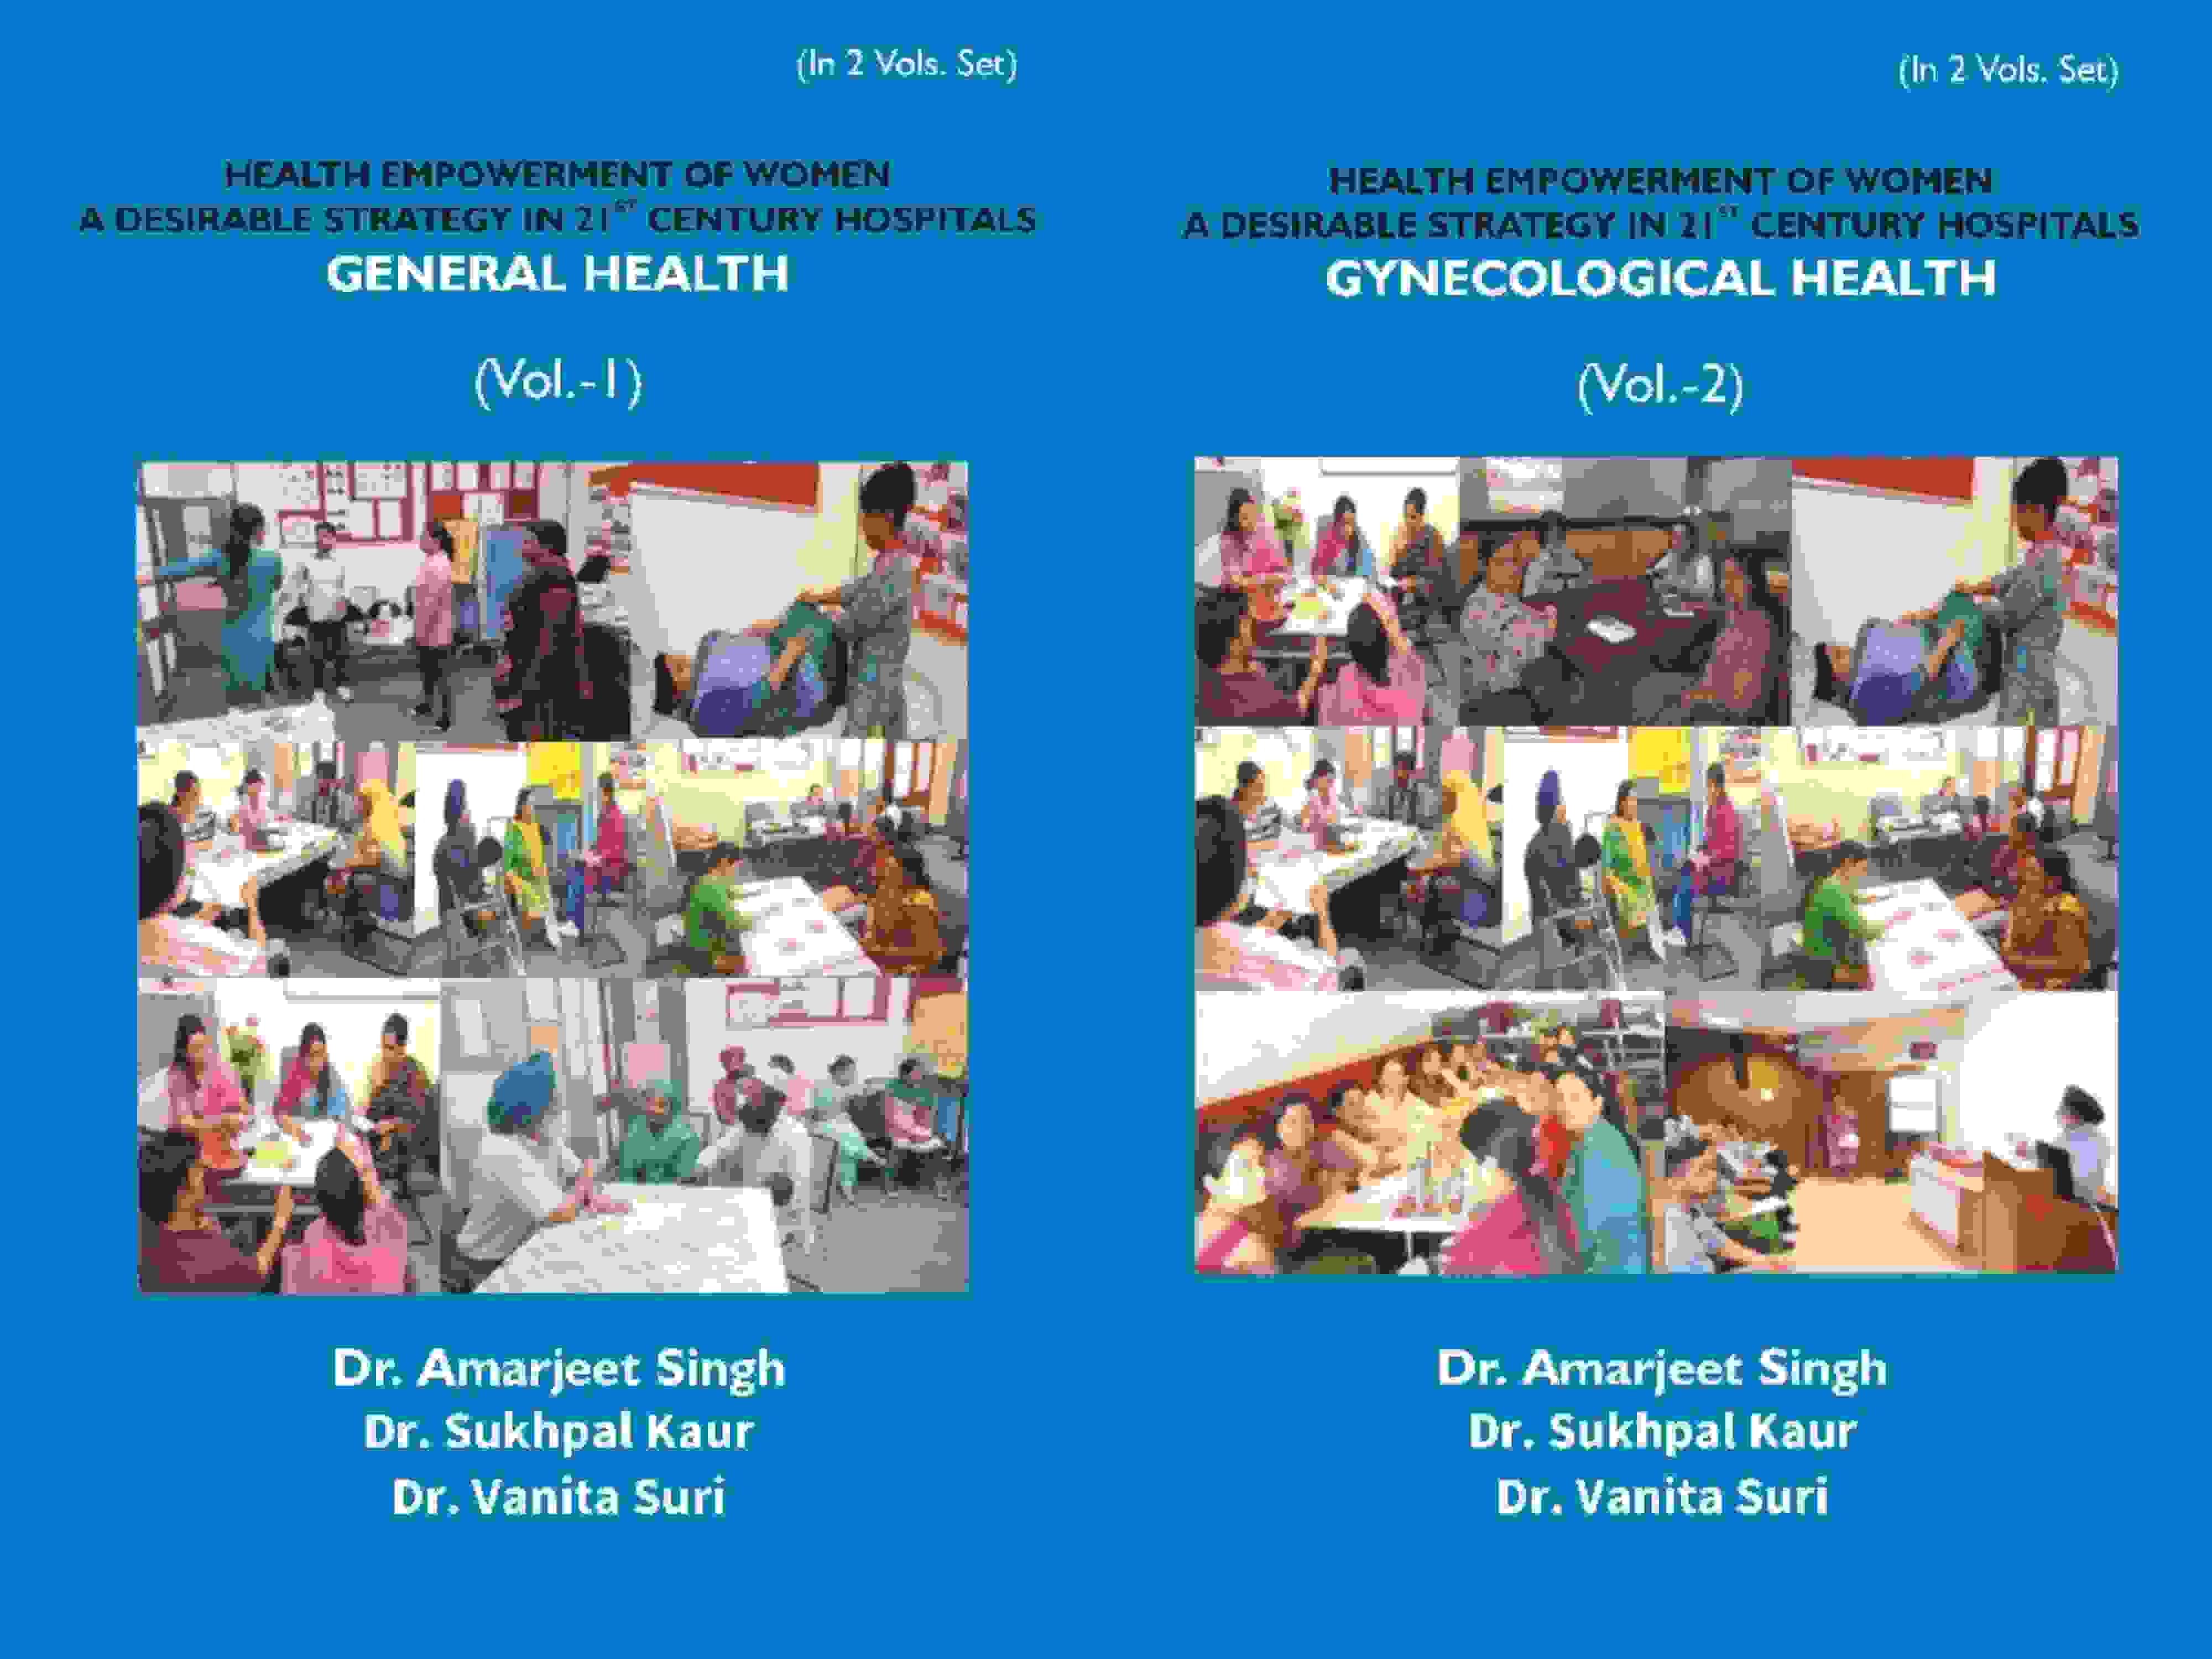 Health Empowerment Of Women A Desirable Strategy In 21st Century Hospitals (1- General Health, 2- Gynecological Health)